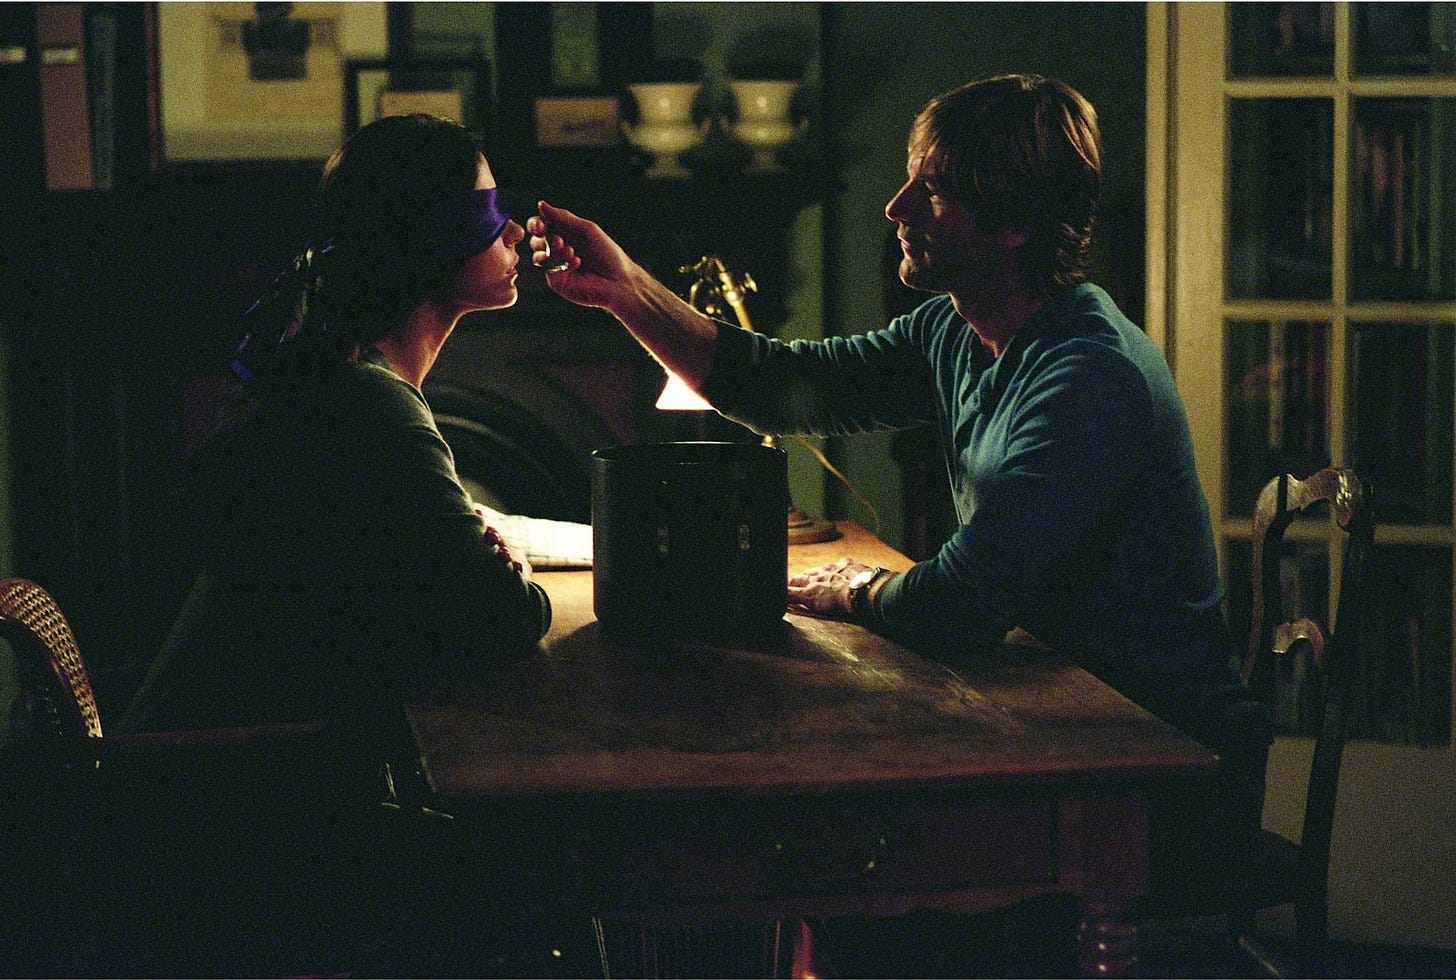 Movie still from No Reservations. A man feeds a blindfolded woman a dessert at a kitchen table.